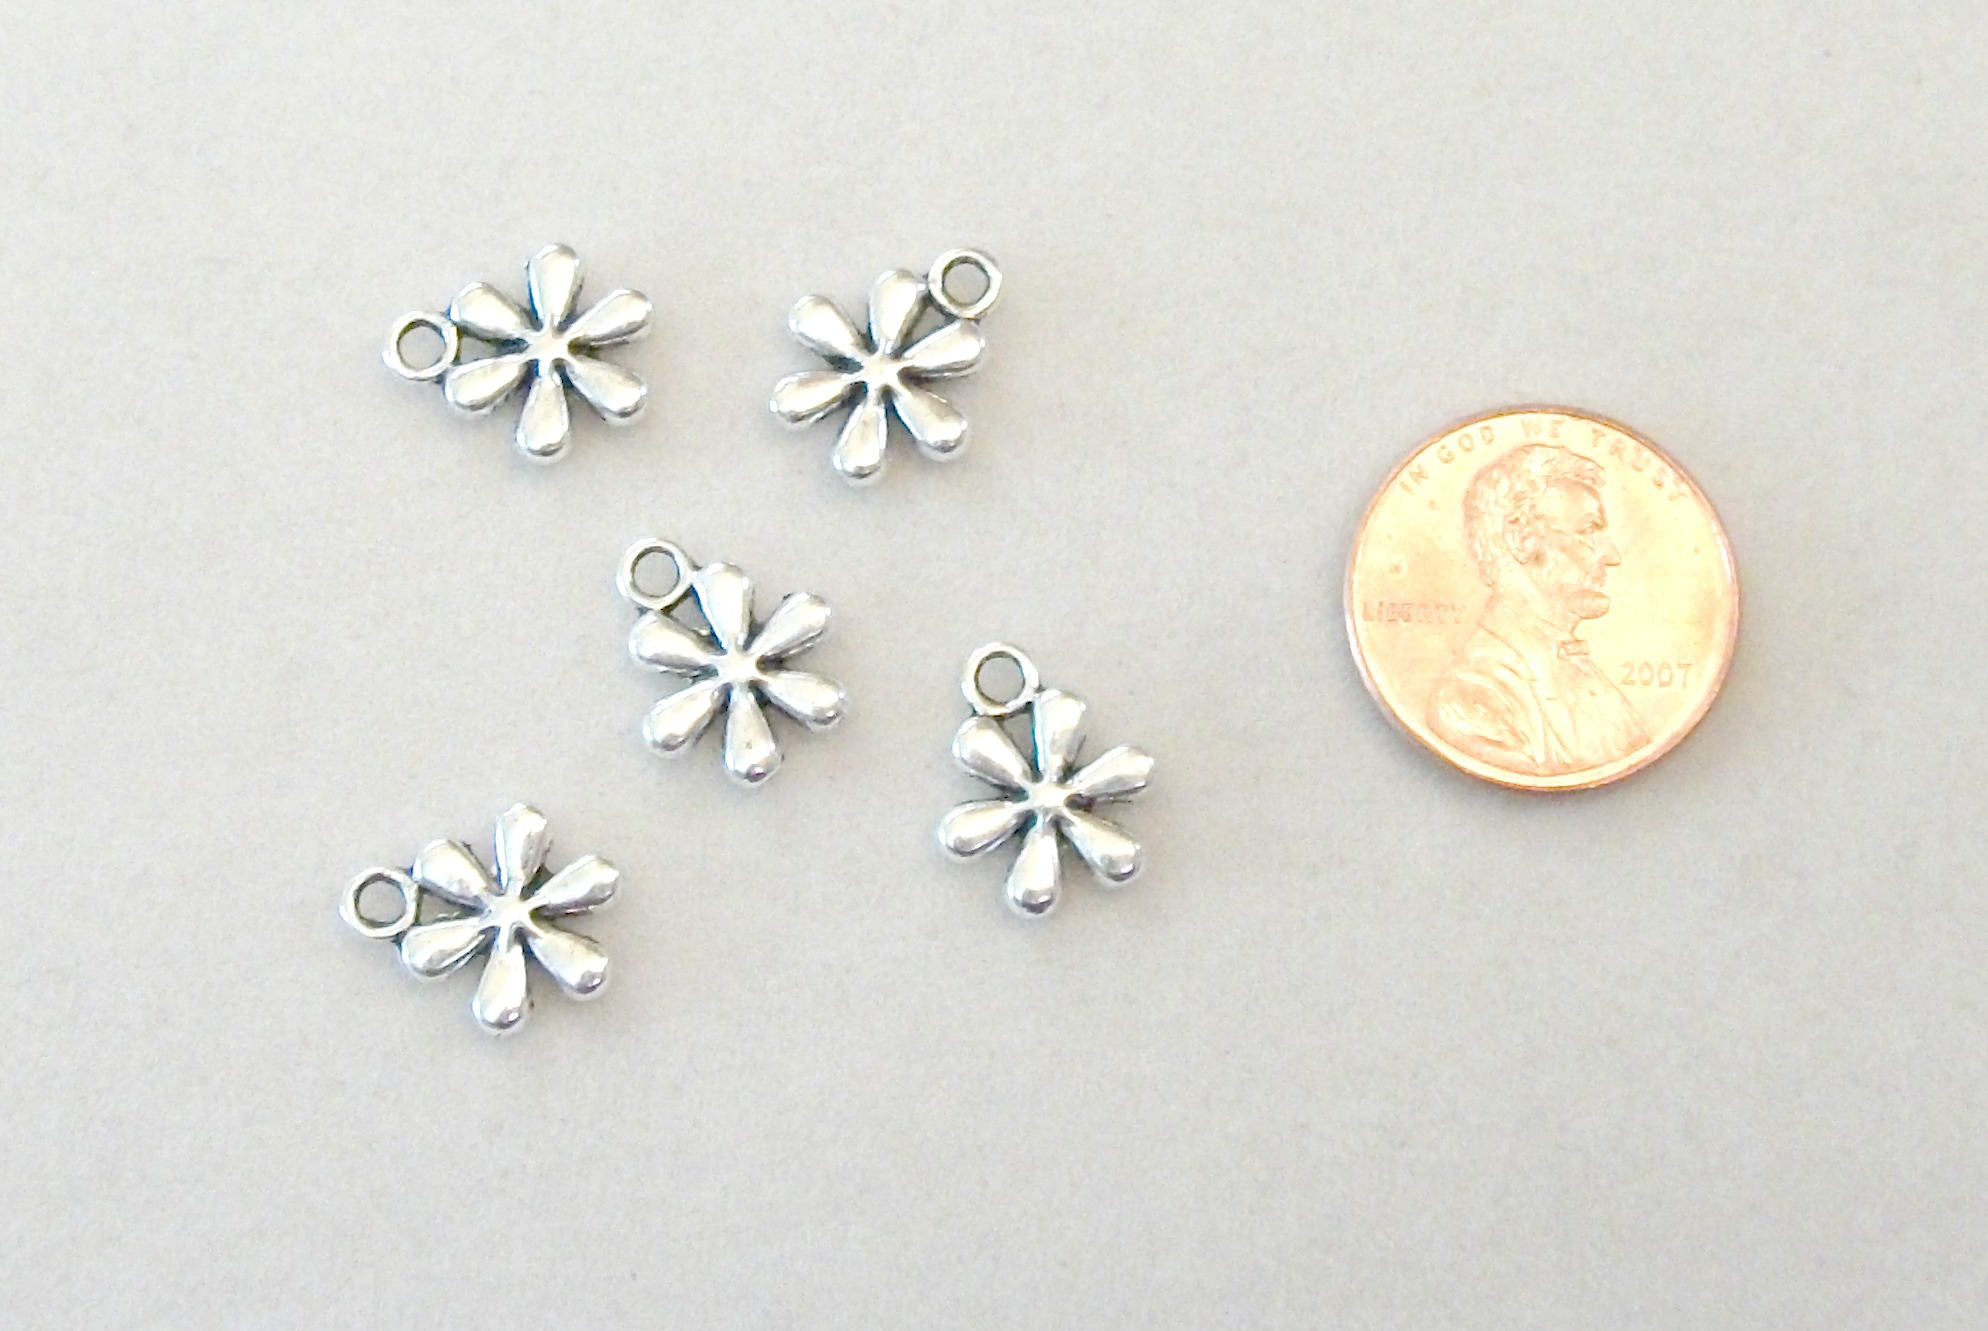 DIY charm Daisy flower charm silver alloy  very cute little daisy flower charms pack of 10 jewelry making embellishment gift tie on